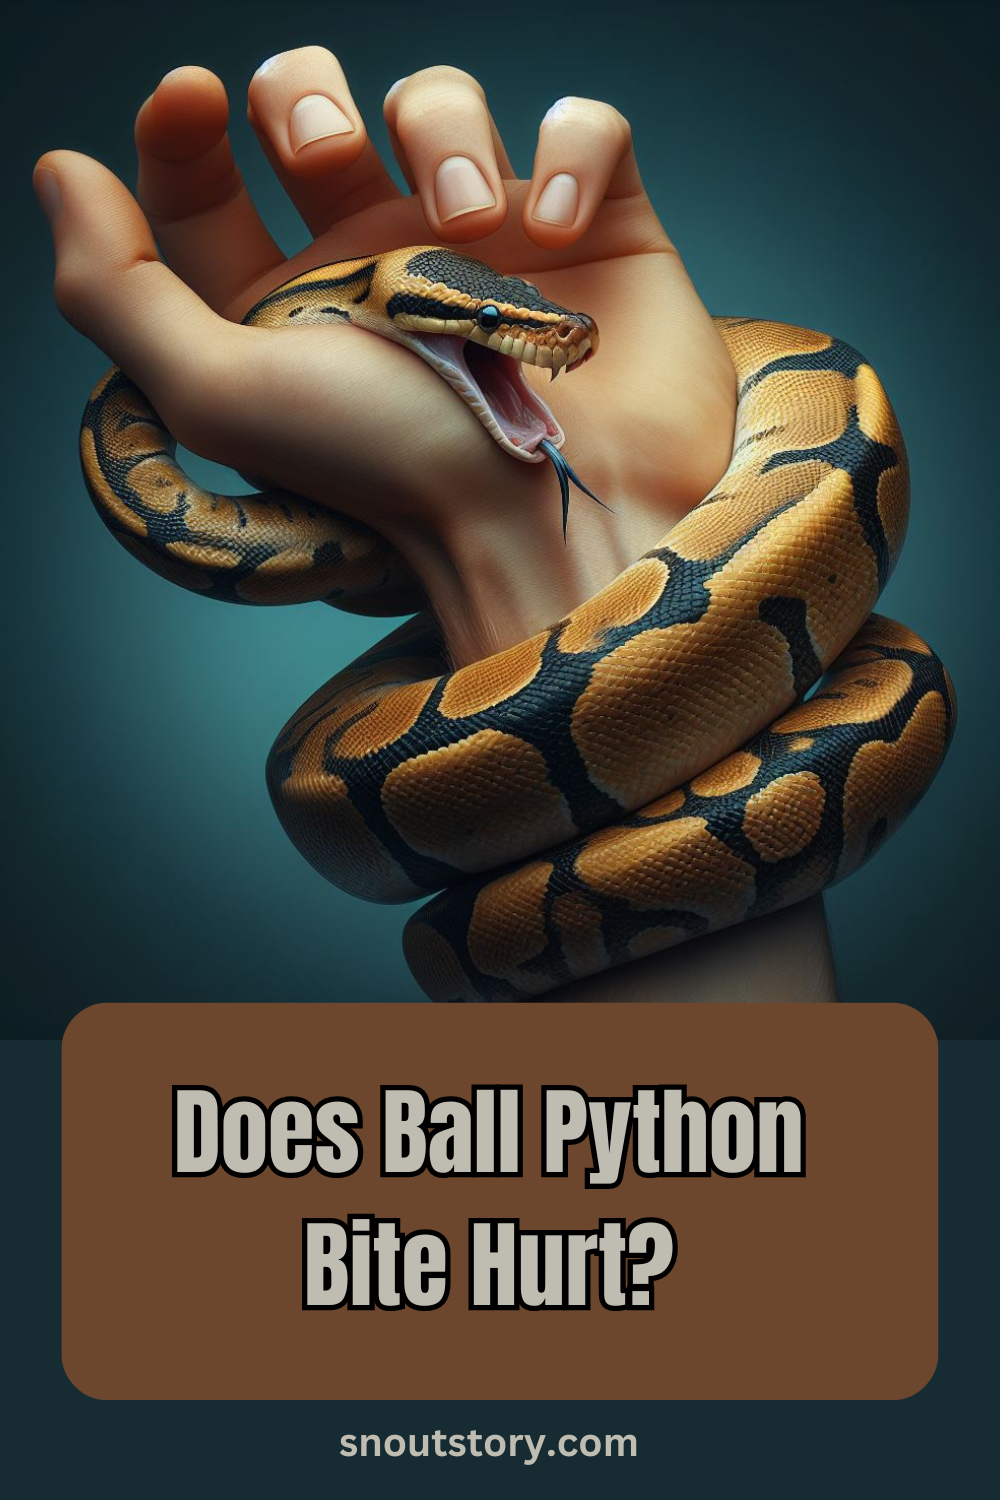 Ball Python Bite – Does it Hurt? Everything you need to know